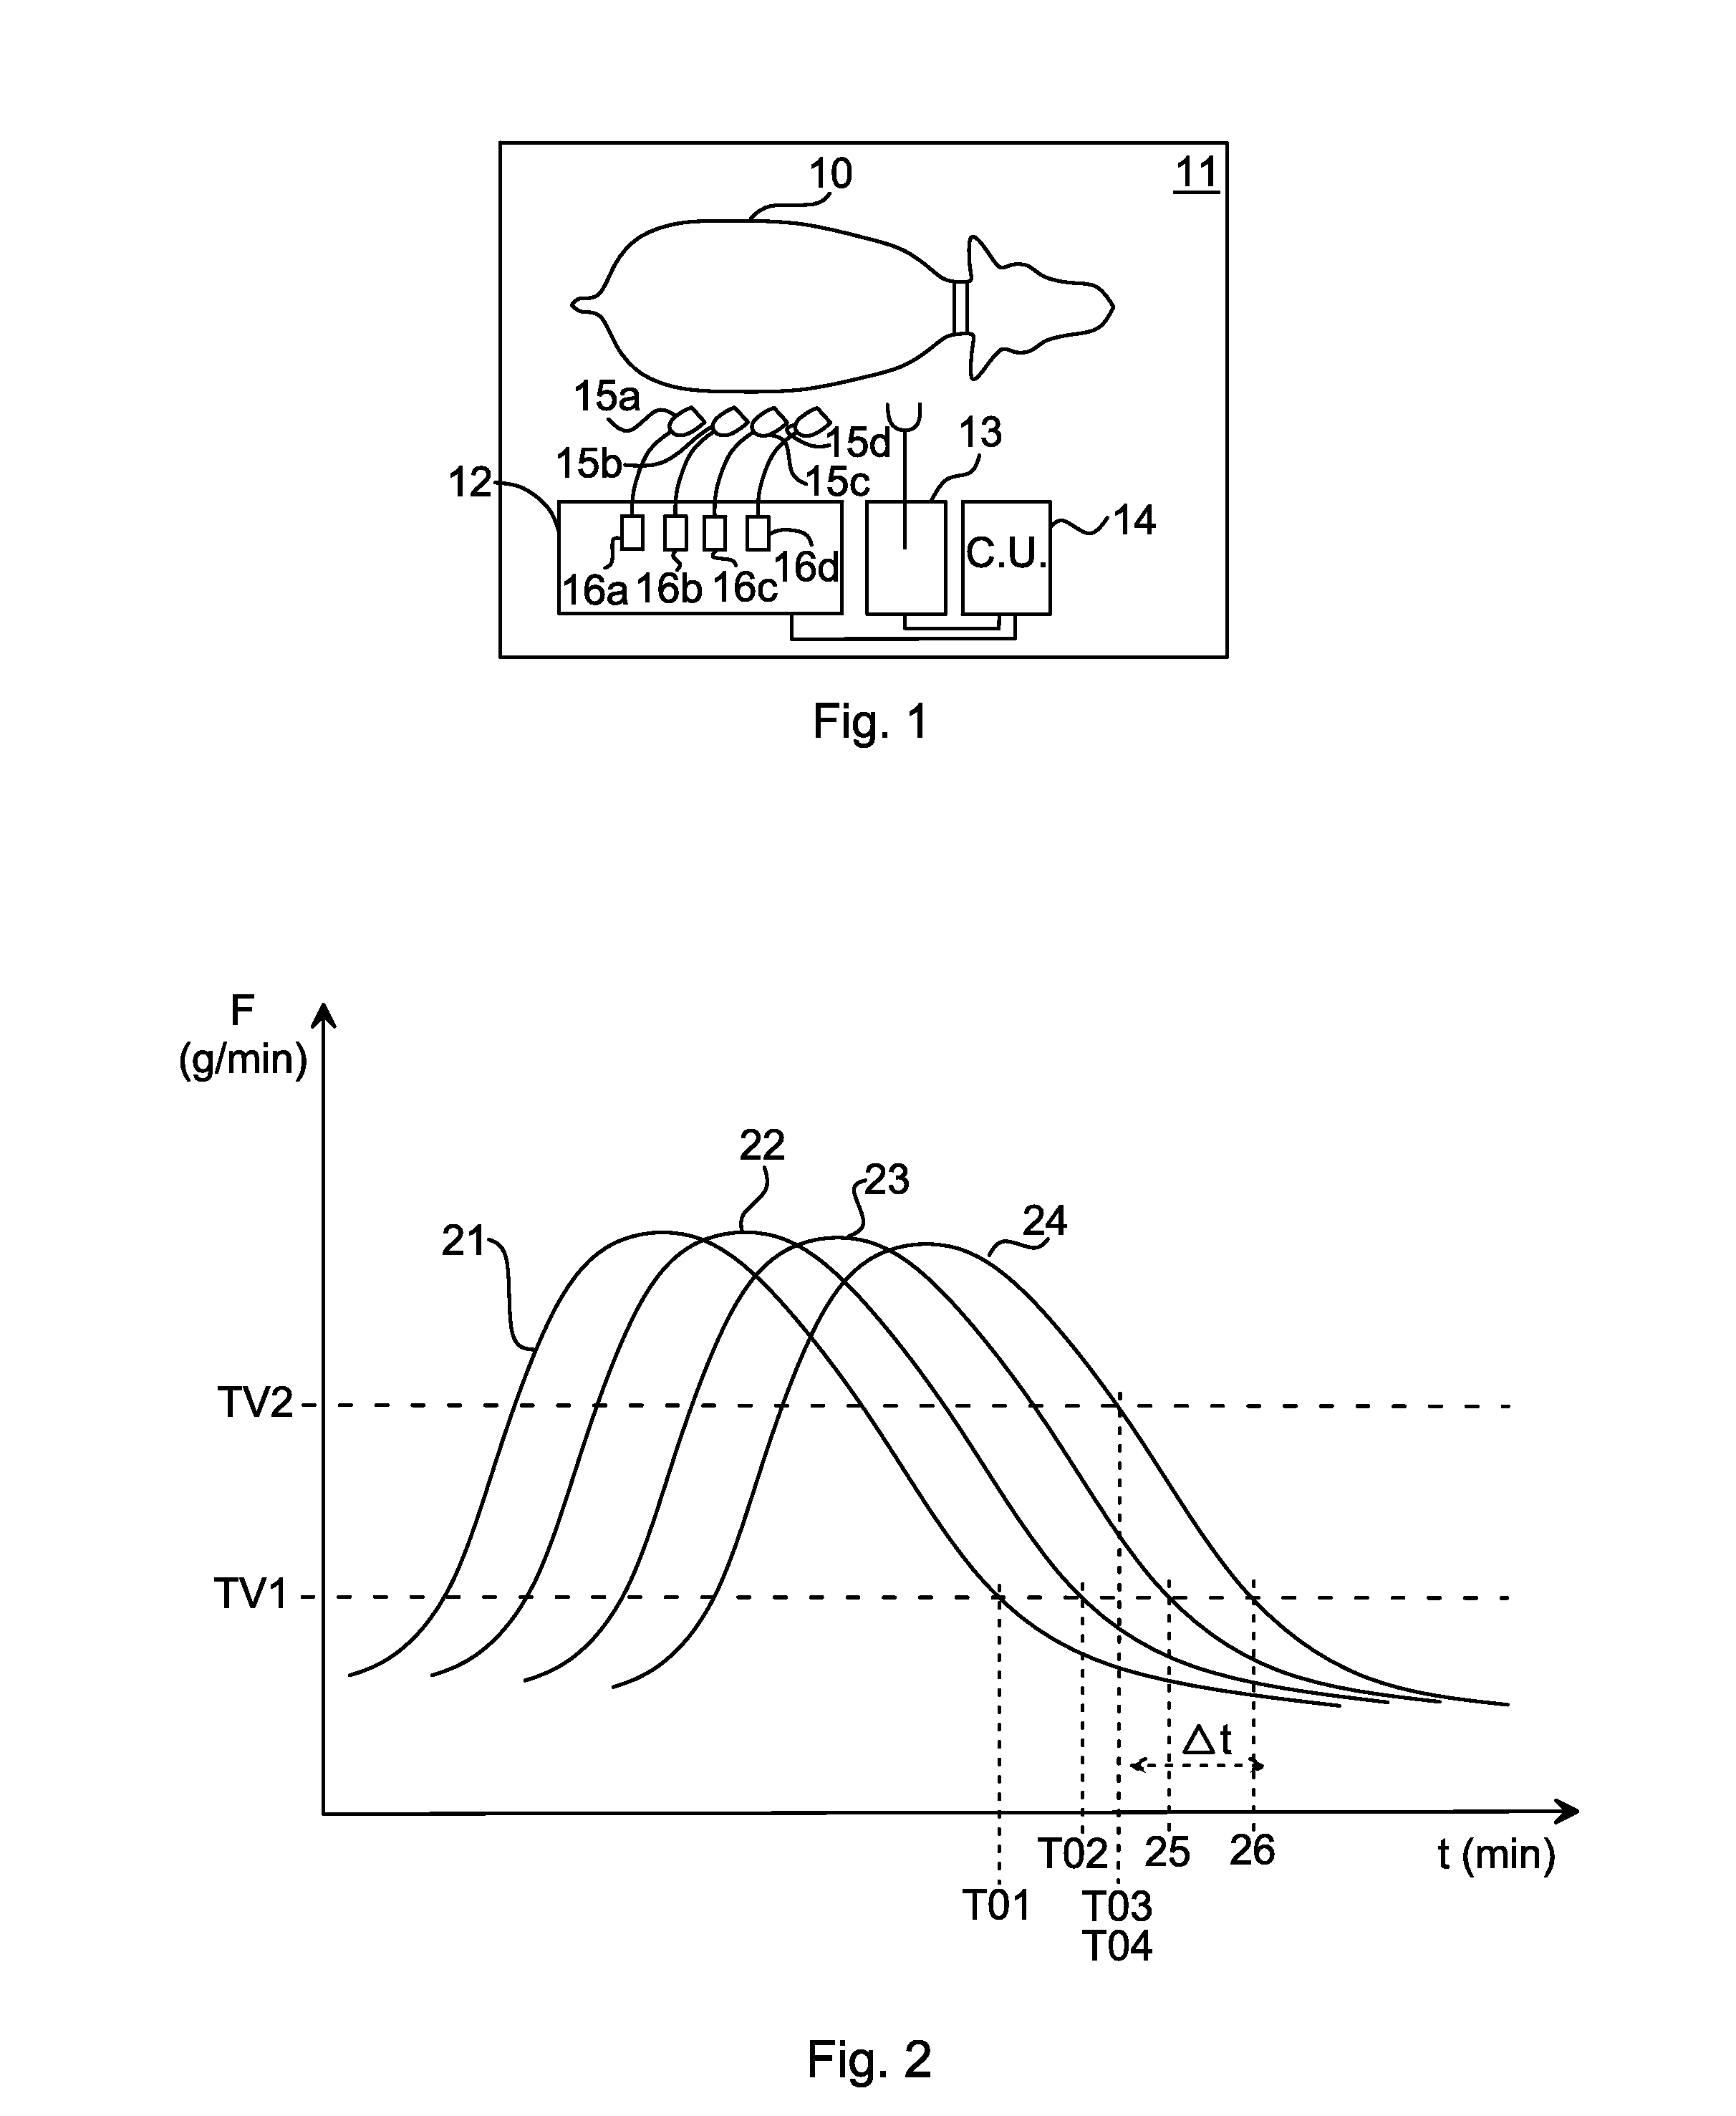 Method of automatically milking animals and automatic milking system